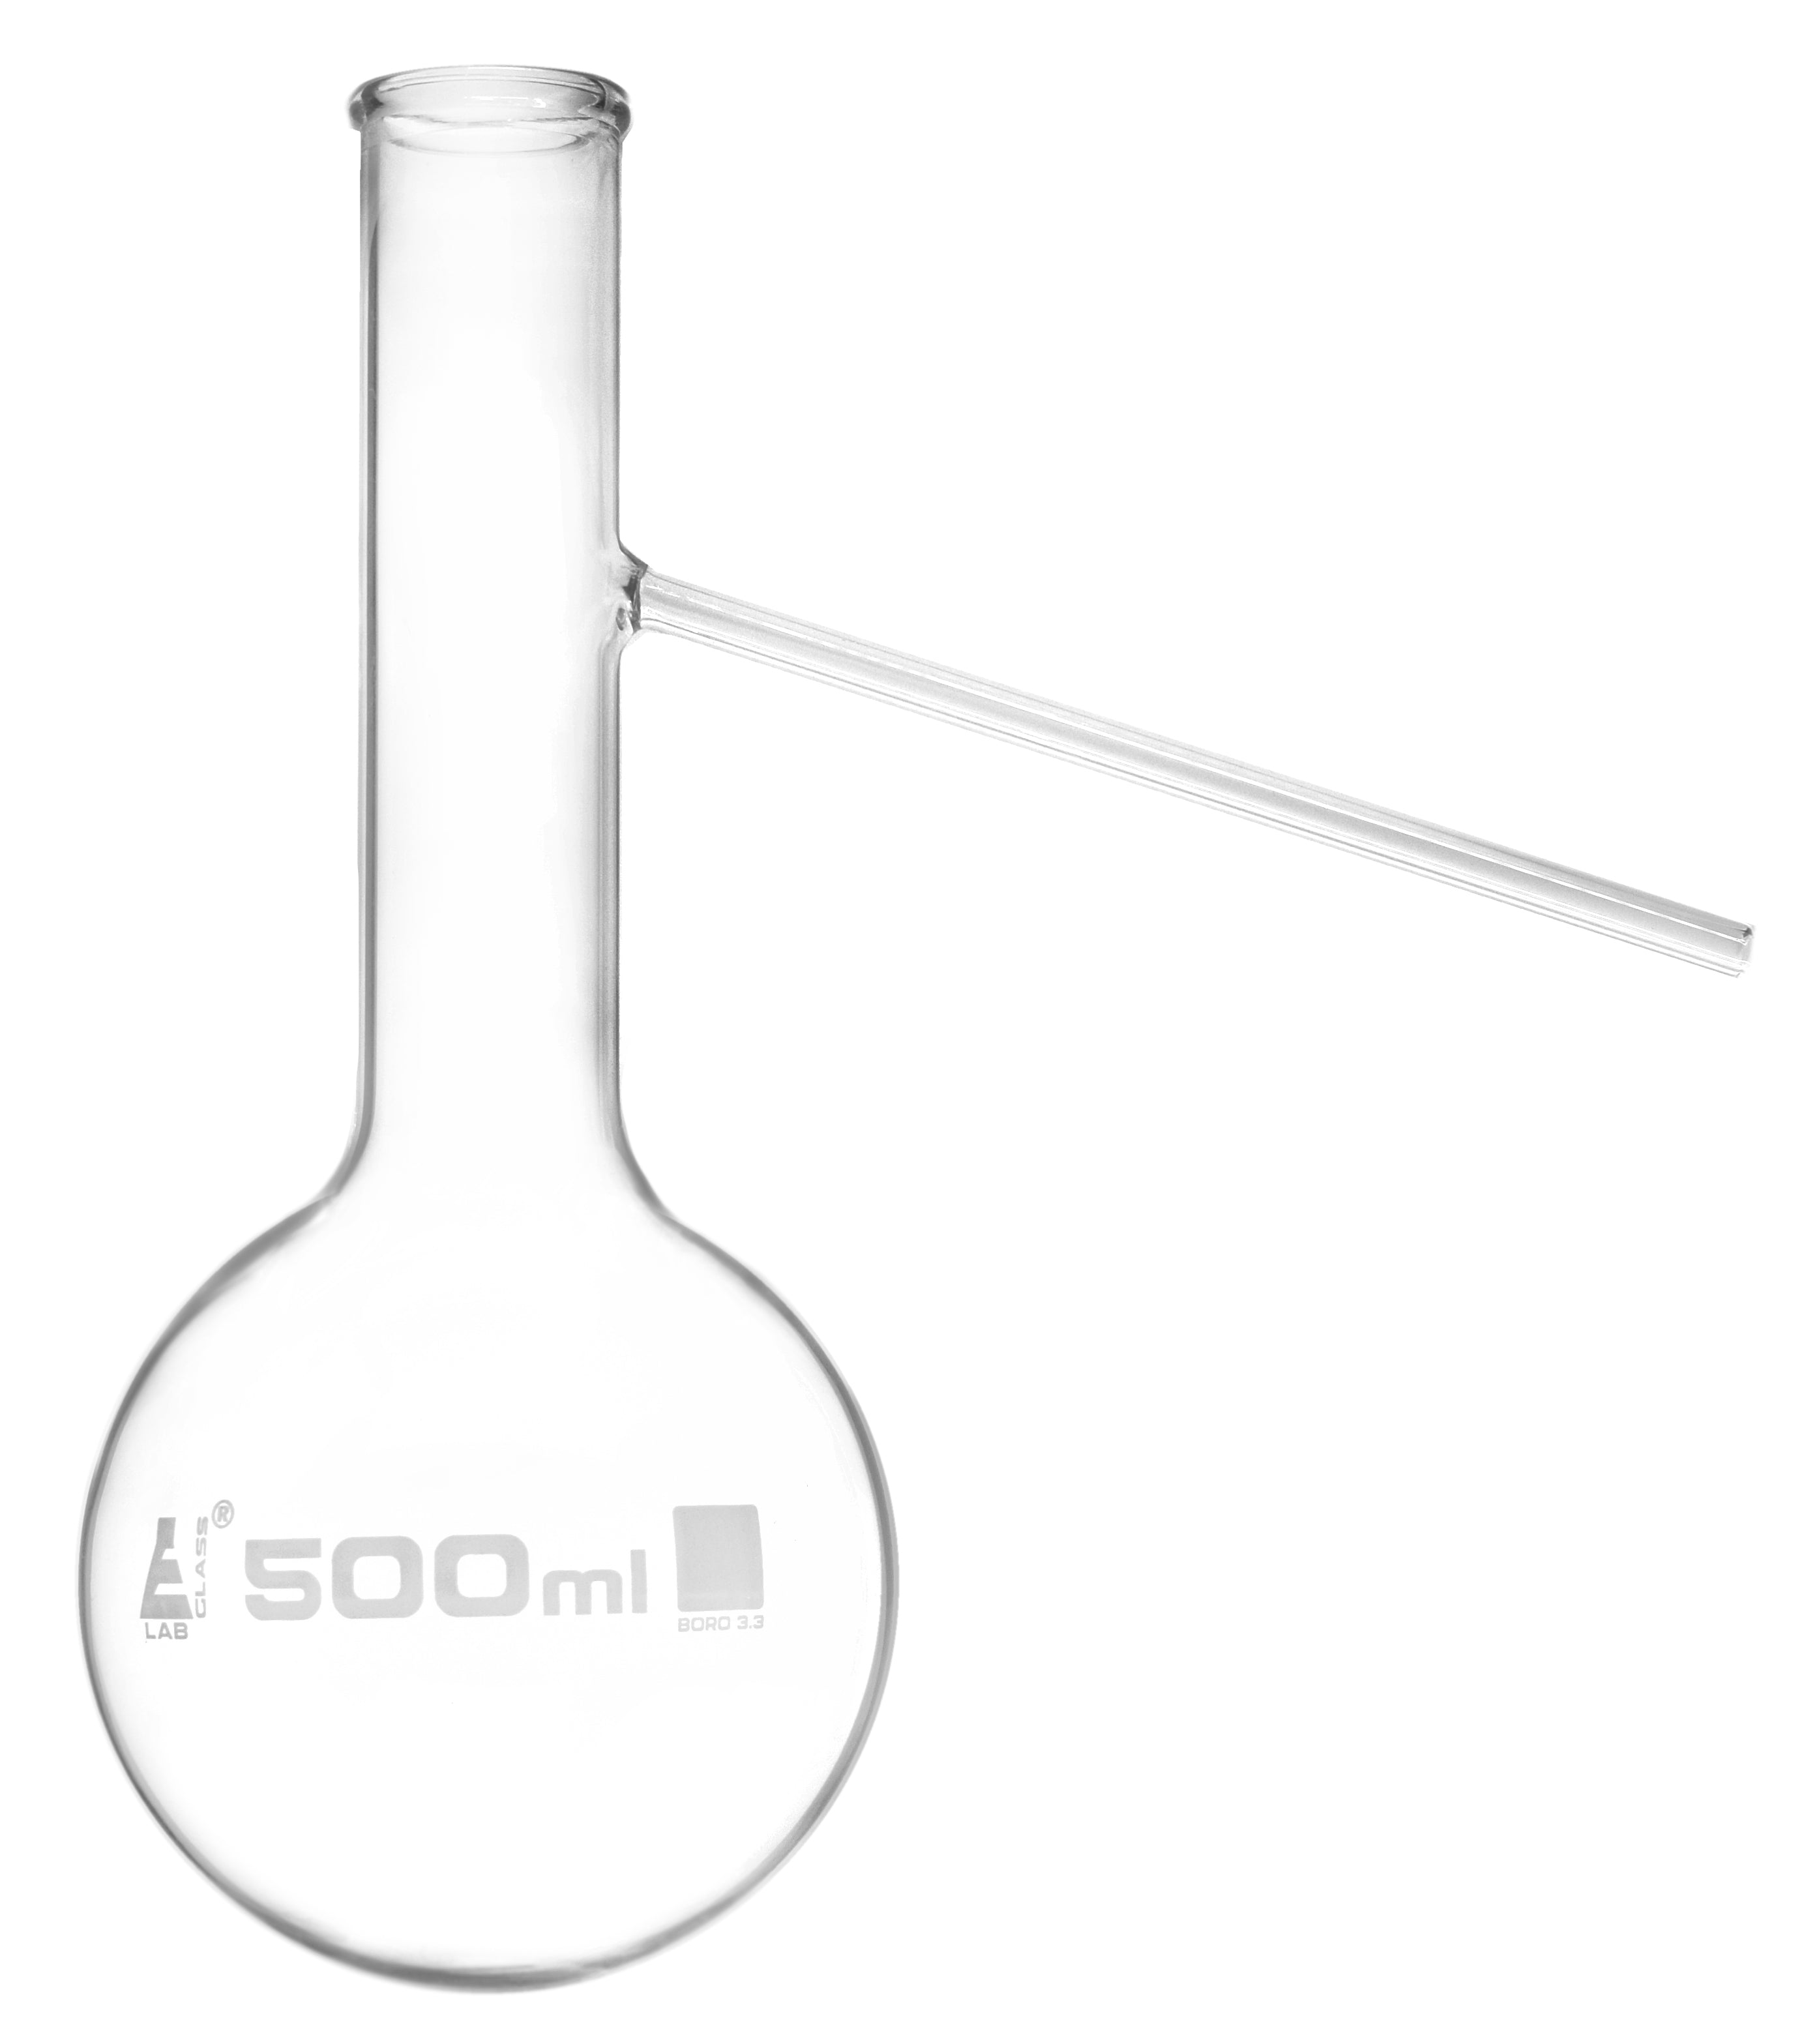 Borosilicate Round Bottom Distilling Flask with Side Arm, 500ml, Autoclavable